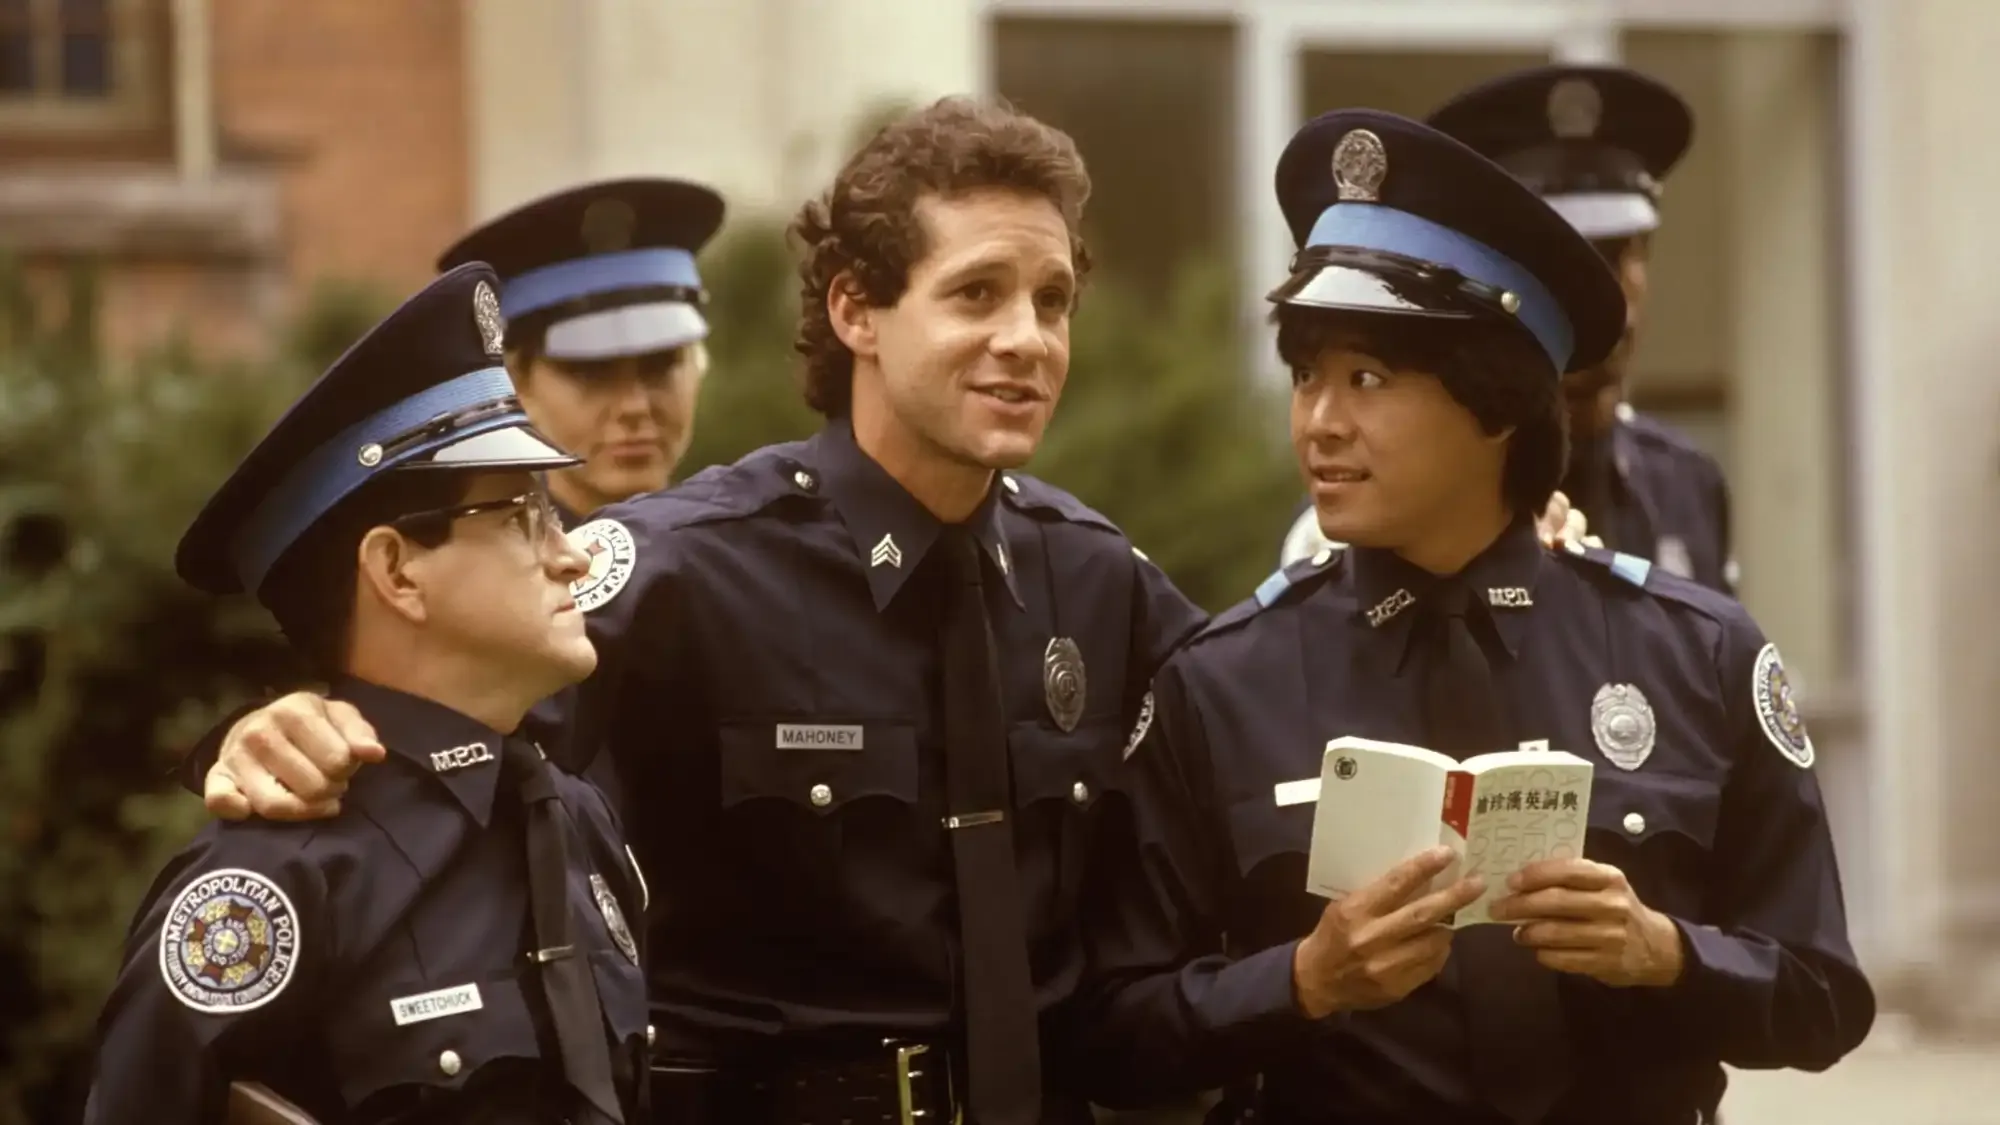 Police Academy 3: Back in Training movie review